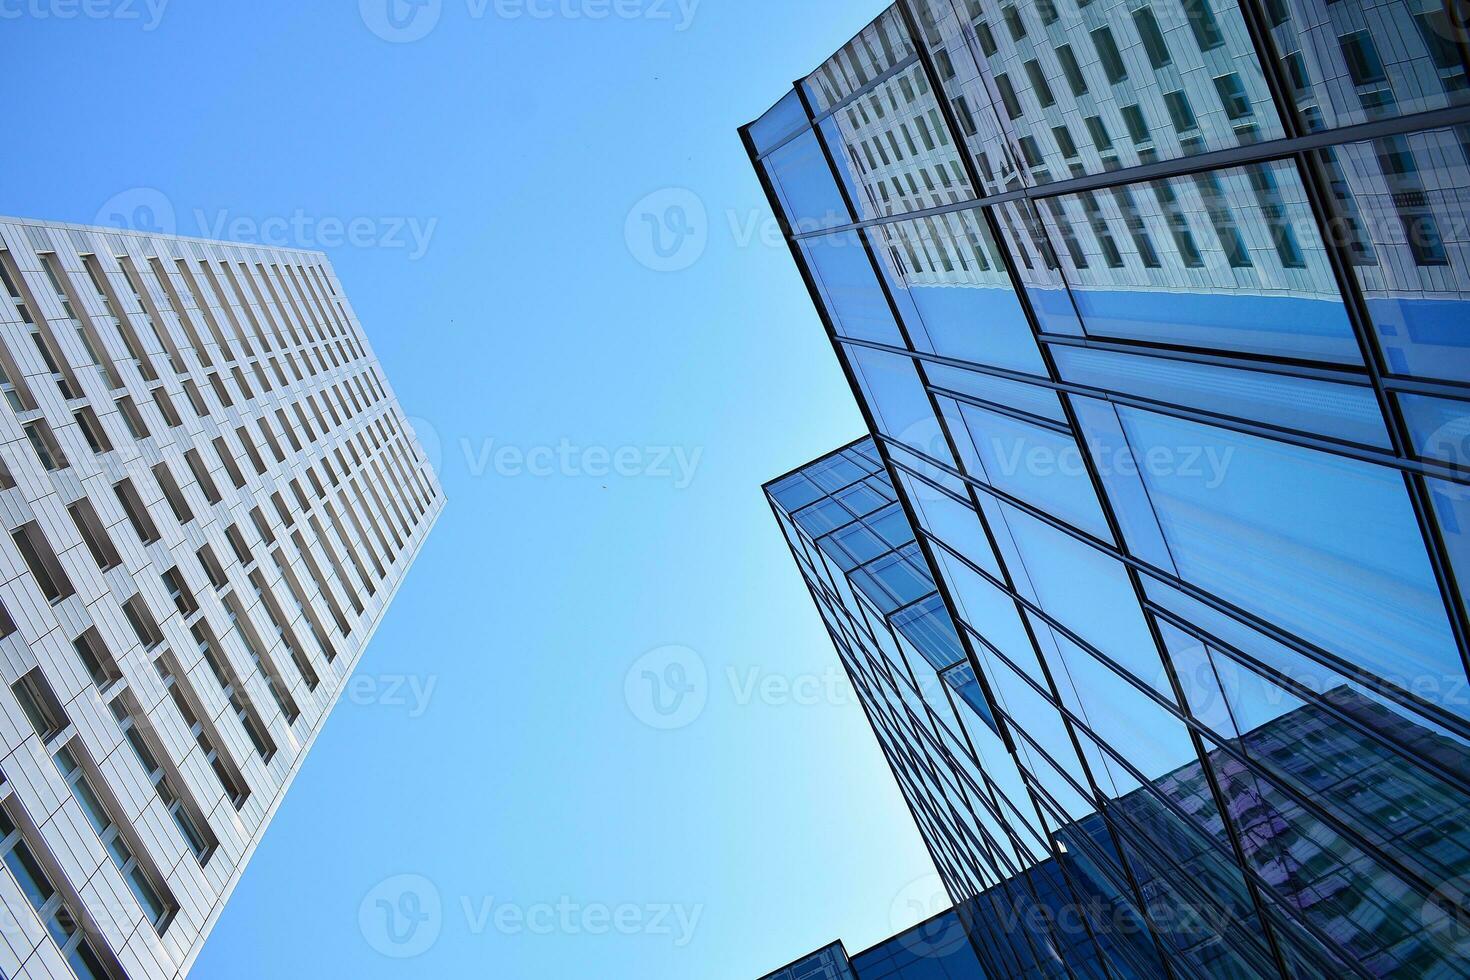 Glass building with transparent facade of the building and blue sky. Structural glass wall reflecting blue sky. Abstract modern architecture fragment. Contemporary architectural background. photo